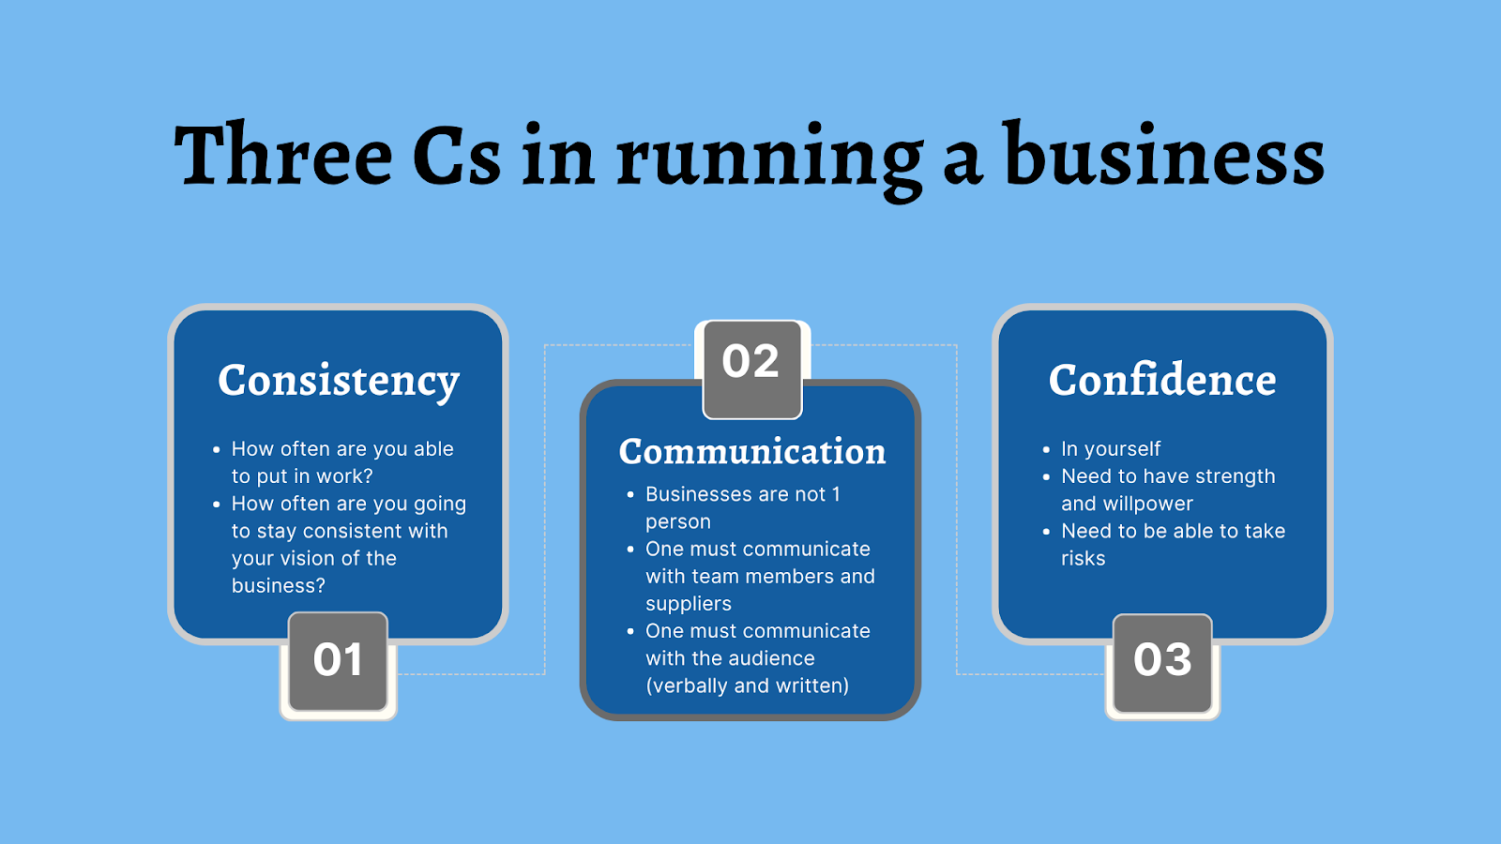 An infographic explaining the three Cs in running a business: consistency, communication and confidence. Consistency means how often you are able to work and stay consistent with your vision of the business. Communication means that you must be able to work with a team, your suppliers and your audience. Confidence means having strength and willpower, as well as taking risks.